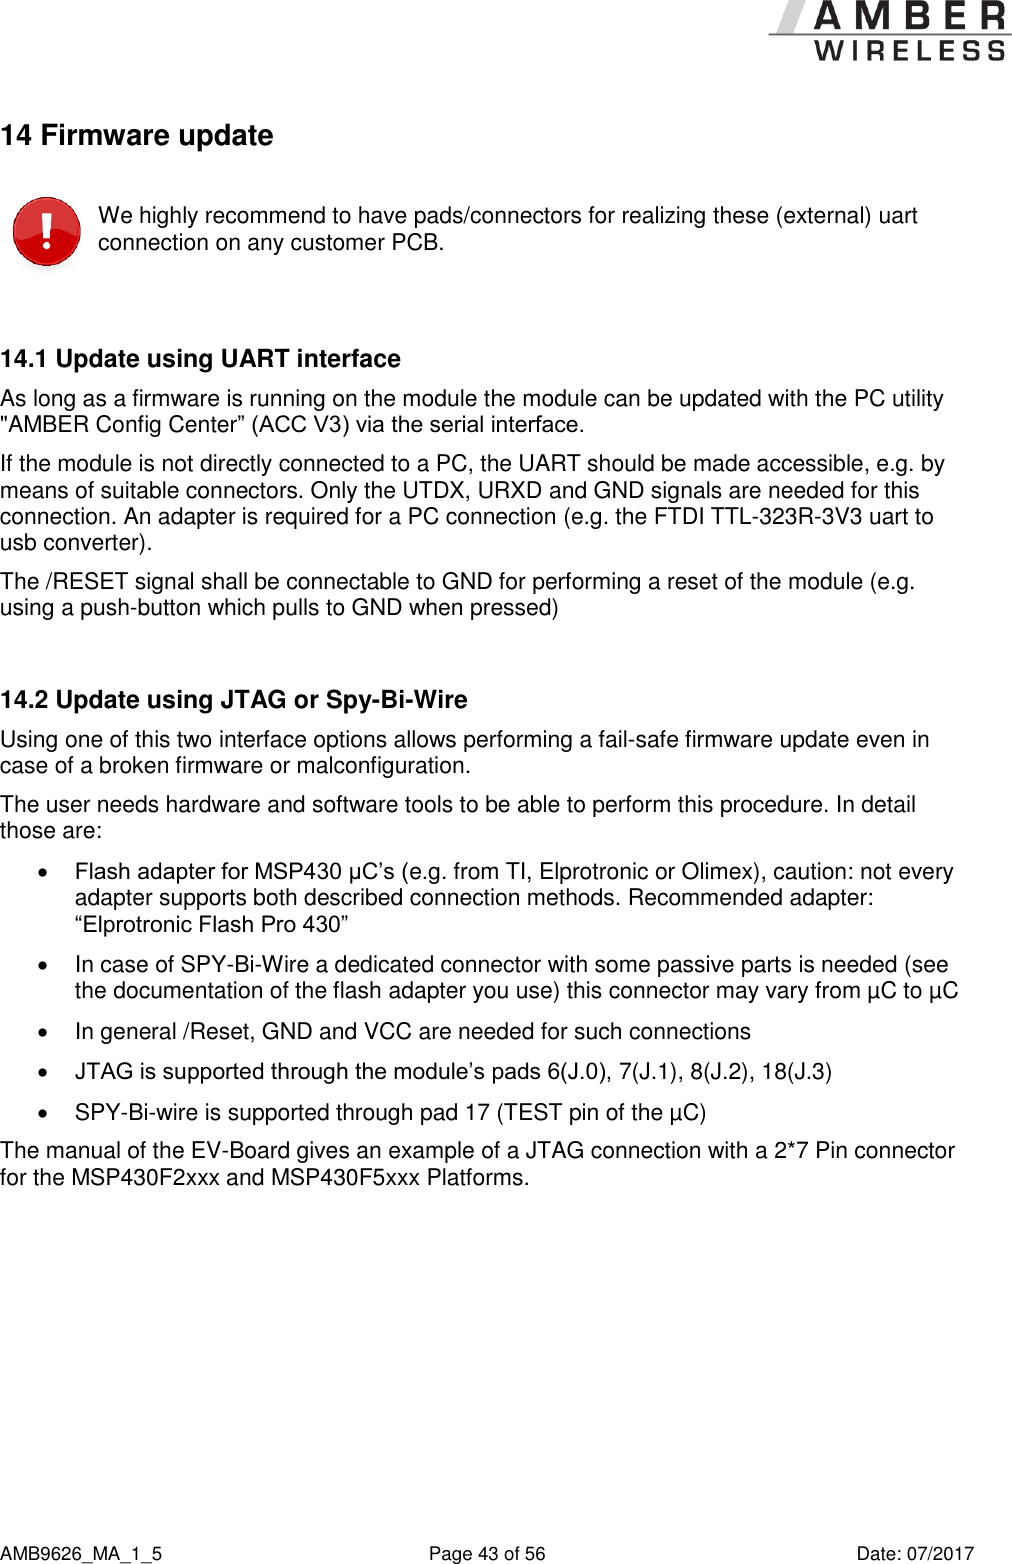      AMB9626_MA_1_5  Page 43 of 56  Date: 07/2017 14 Firmware update  We highly recommend to have pads/connectors for realizing these (external) uart connection on any customer PCB.  14.1 Update using UART interface As long as a firmware is running on the module the module can be updated with the PC utility &quot;AMBER Config Center” (ACC V3) via the serial interface. If the module is not directly connected to a PC, the UART should be made accessible, e.g. by means of suitable connectors. Only the UTDX, URXD and GND signals are needed for this connection. An adapter is required for a PC connection (e.g. the FTDI TTL-323R-3V3 uart to usb converter). The /RESET signal shall be connectable to GND for performing a reset of the module (e.g. using a push-button which pulls to GND when pressed)  14.2 Update using JTAG or Spy-Bi-Wire Using one of this two interface options allows performing a fail-safe firmware update even in case of a broken firmware or malconfiguration. The user needs hardware and software tools to be able to perform this procedure. In detail those are:  Flash adapter for MSP430 µC’s (e.g. from TI, Elprotronic or Olimex), caution: not every adapter supports both described connection methods. Recommended adapter: “Elprotronic Flash Pro 430”   In case of SPY-Bi-Wire a dedicated connector with some passive parts is needed (see the documentation of the flash adapter you use) this connector may vary from µC to µC   In general /Reset, GND and VCC are needed for such connections  JTAG is supported through the module’s pads 6(J.0), 7(J.1), 8(J.2), 18(J.3)  SPY-Bi-wire is supported through pad 17 (TEST pin of the µC) The manual of the EV-Board gives an example of a JTAG connection with a 2*7 Pin connector for the MSP430F2xxx and MSP430F5xxx Platforms.   